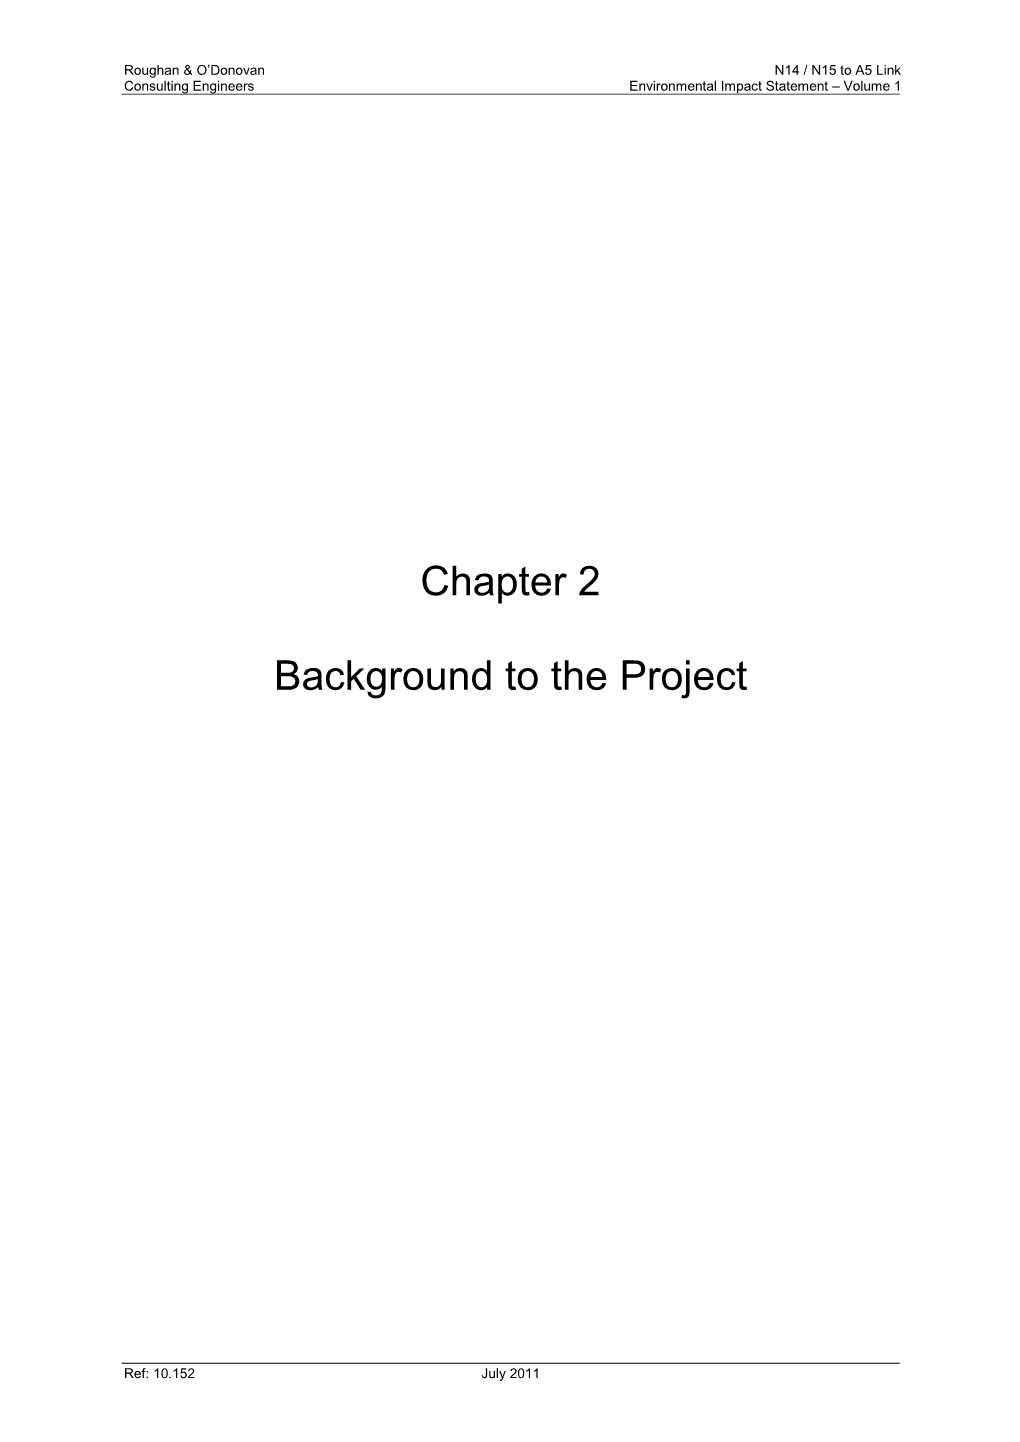 Chapter 2 Background to the Project